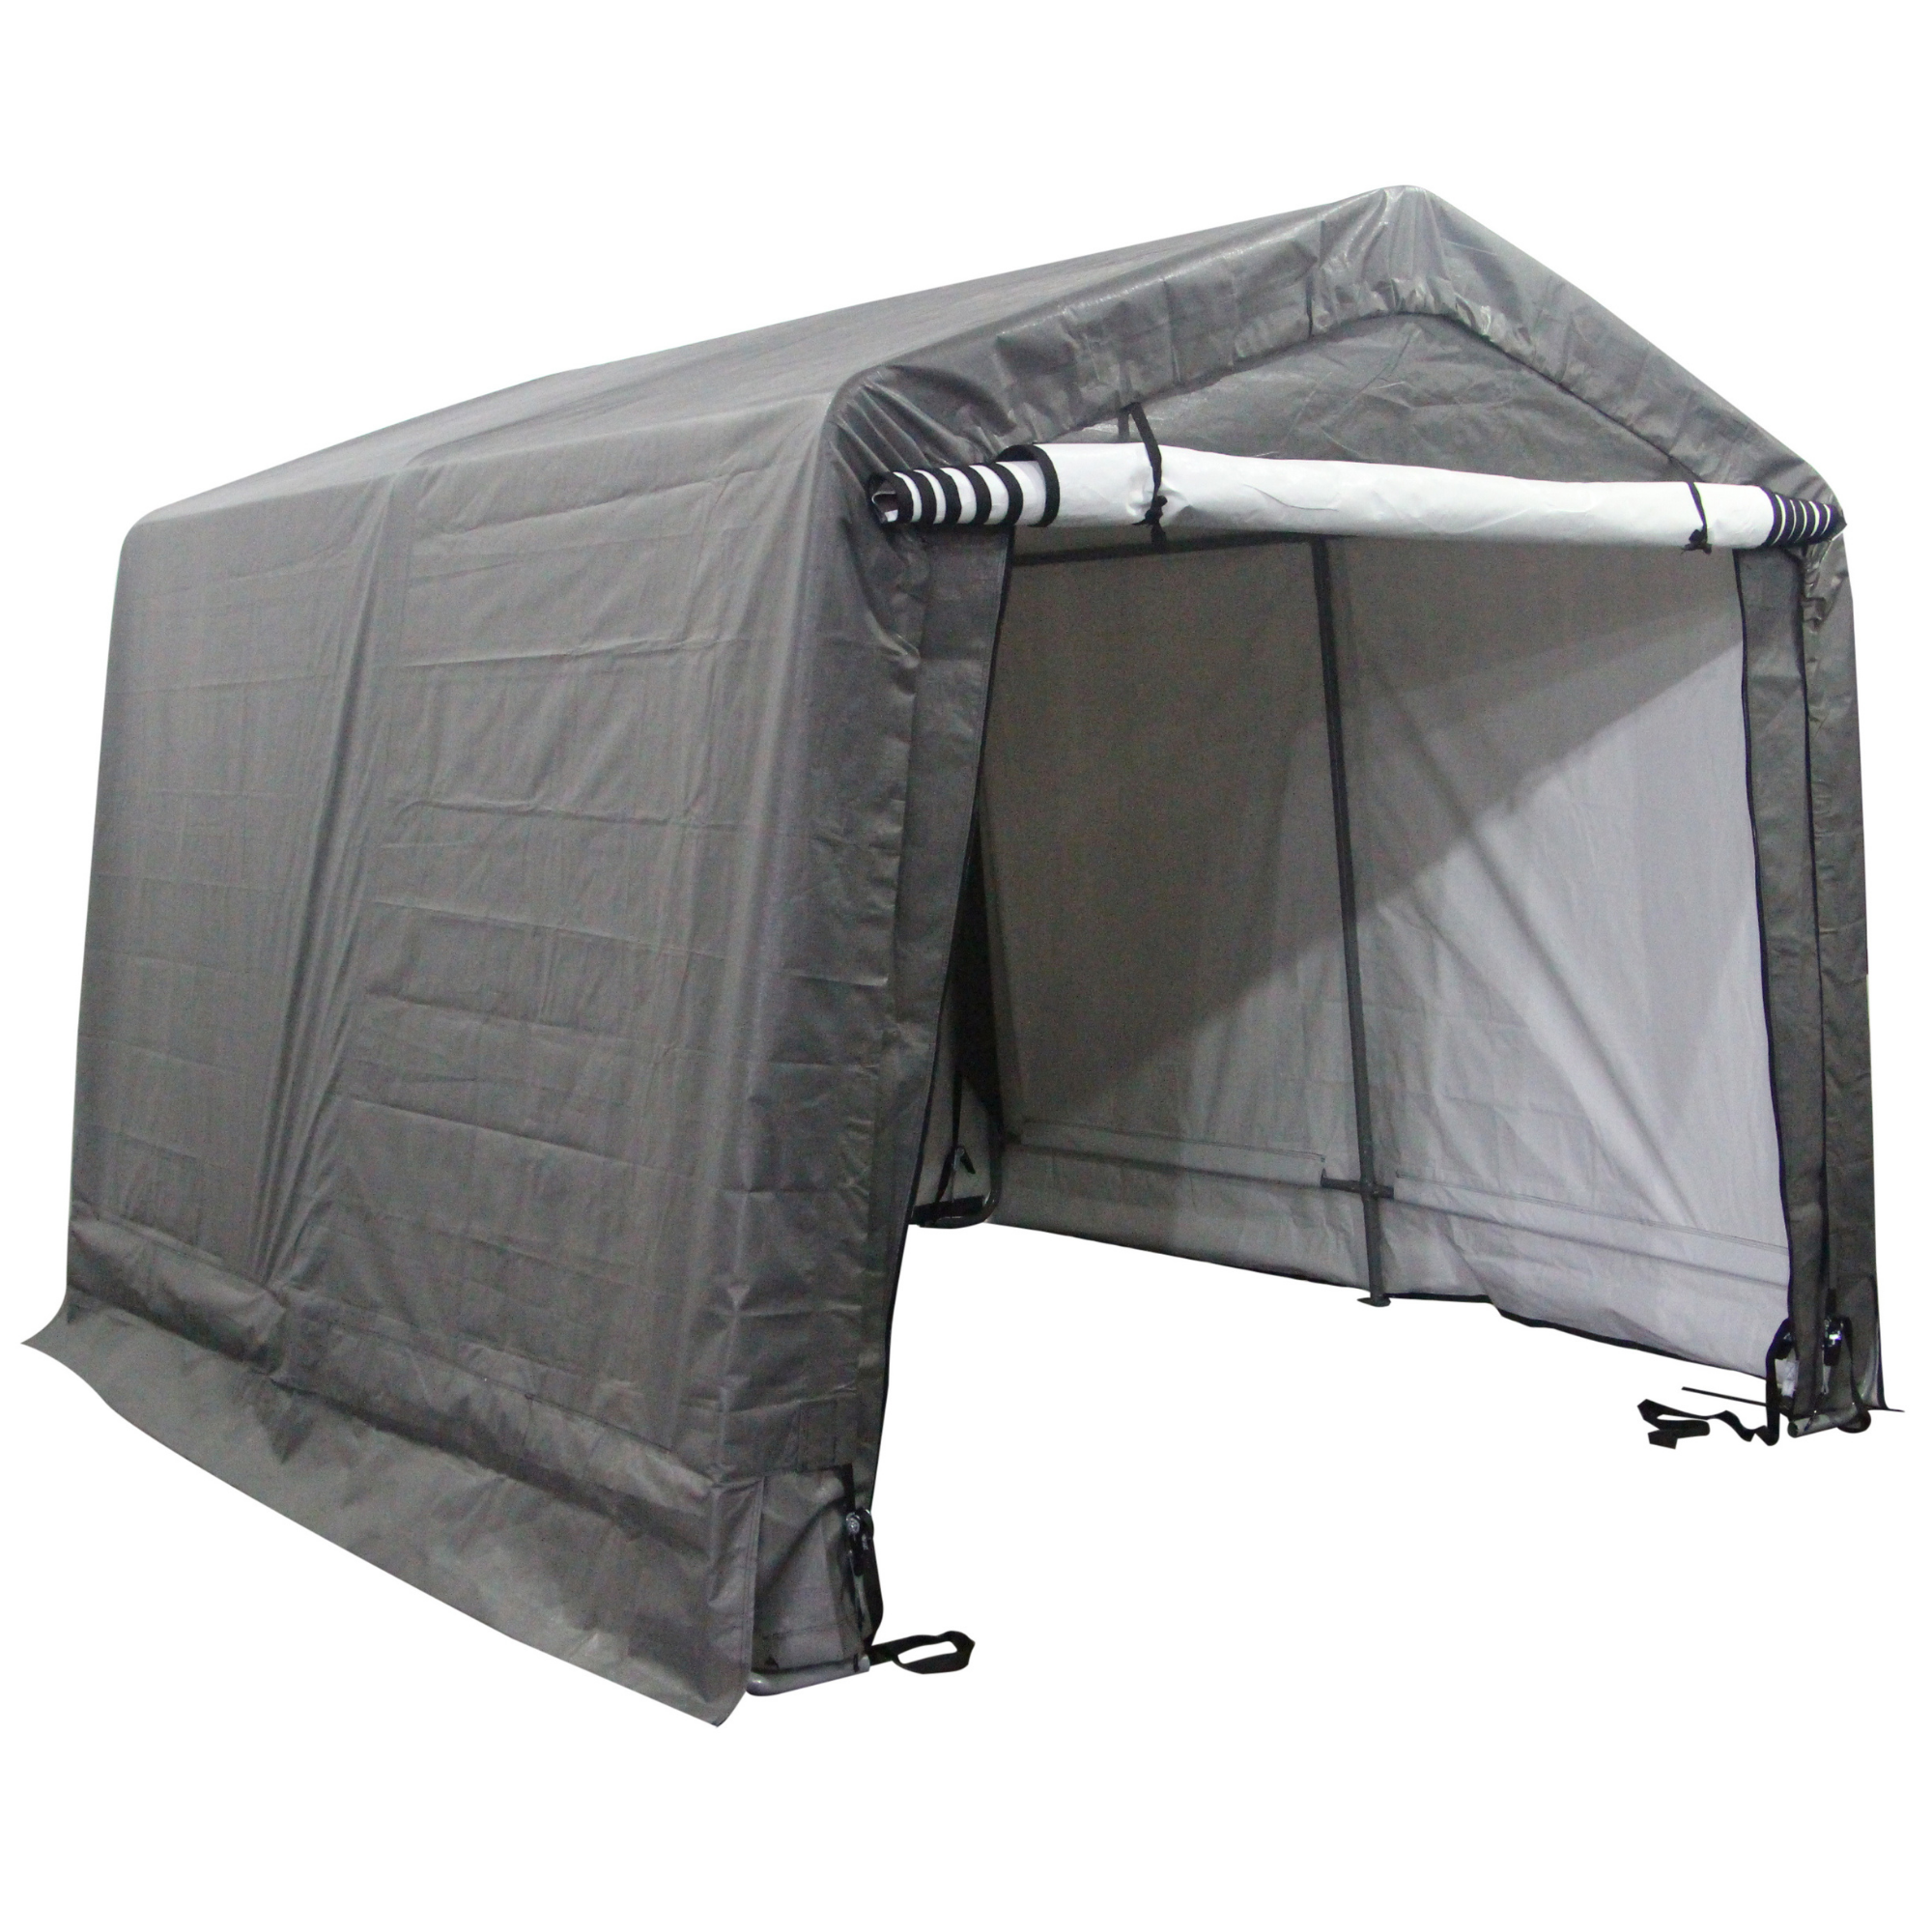 Billyoh Flexi Pop Up Portable Fabric Shed 10x10